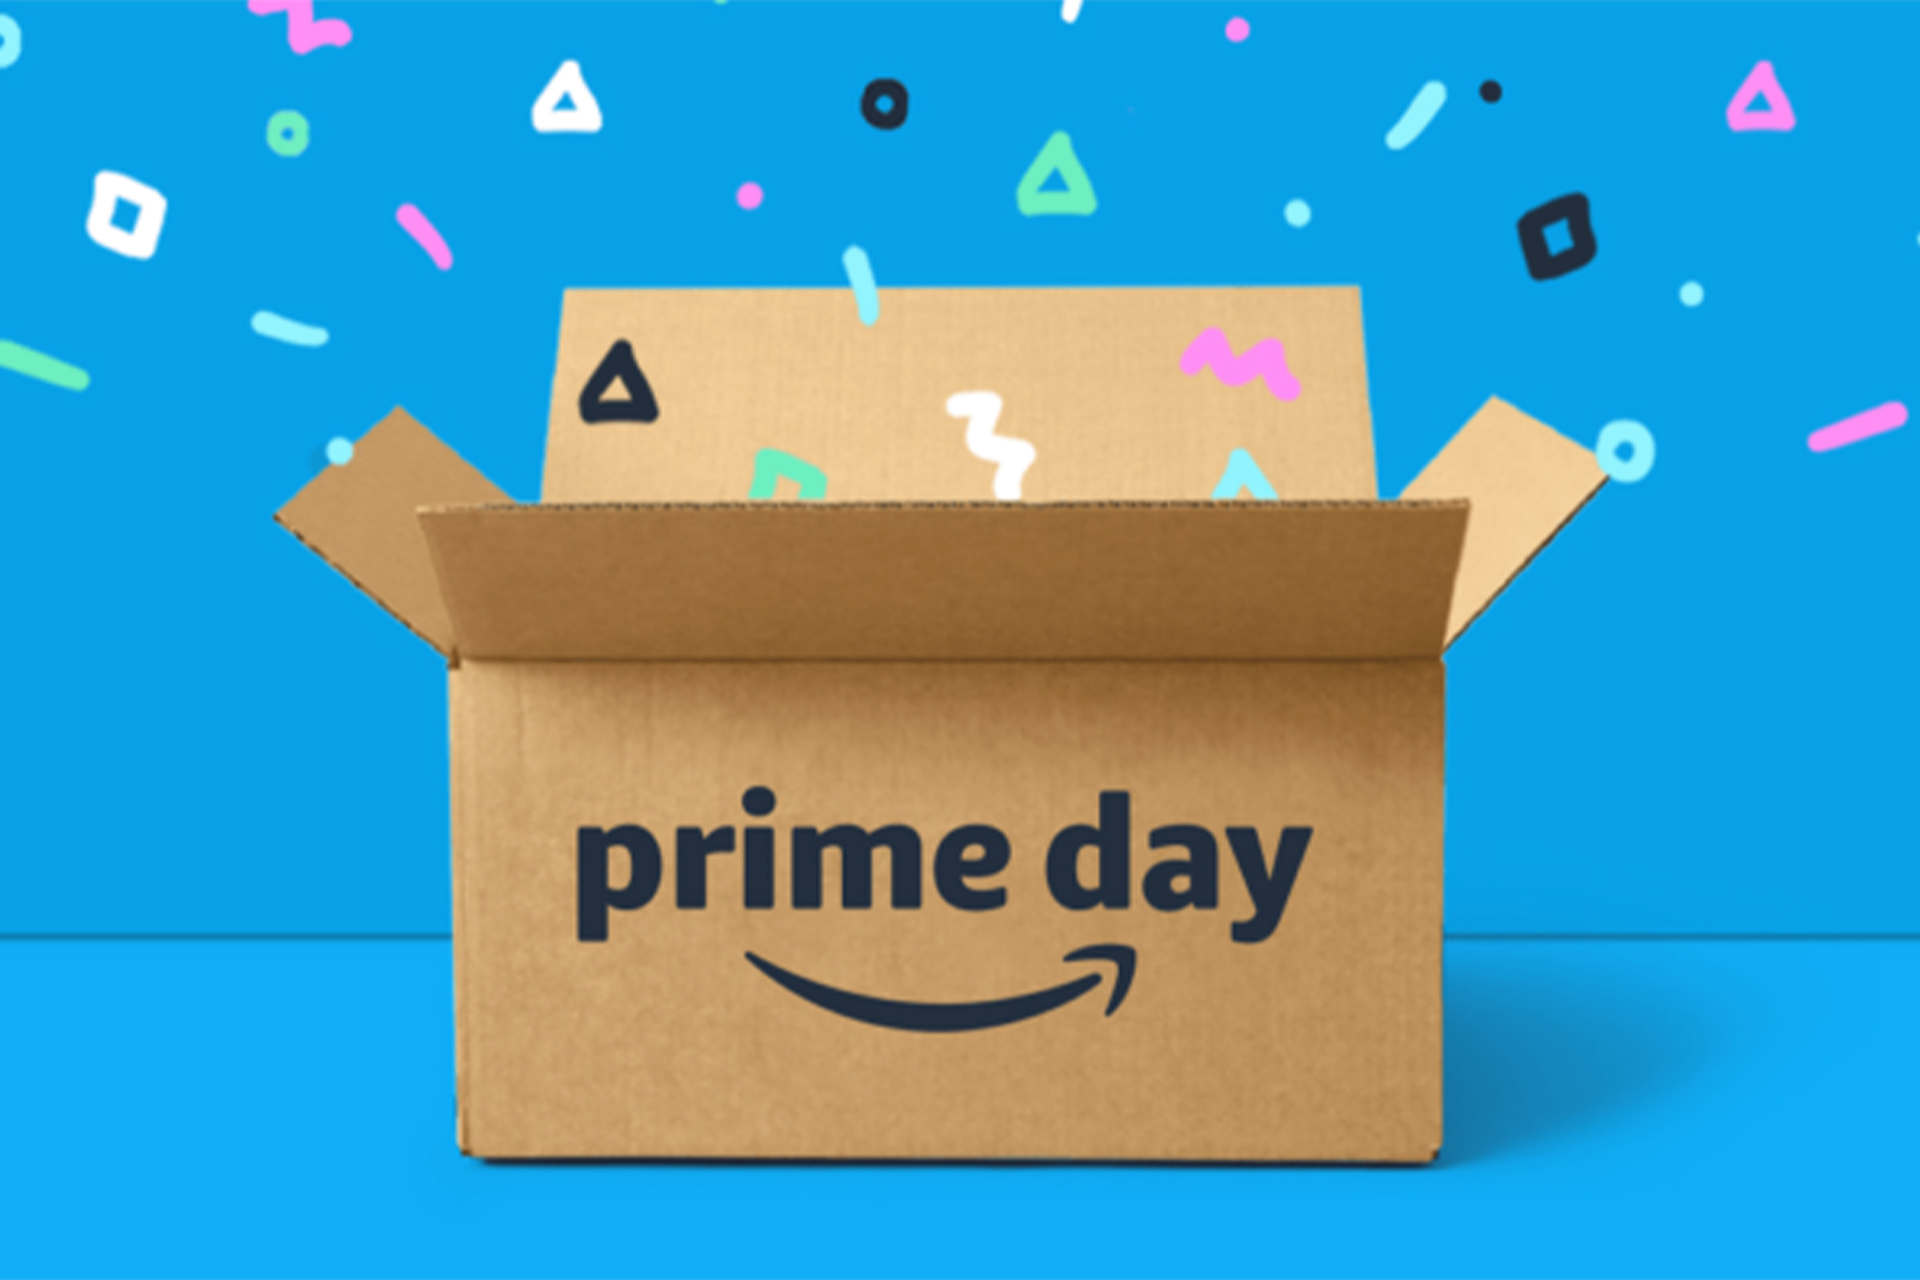 Amazon Prime Day Home Items Tops Spending Categories